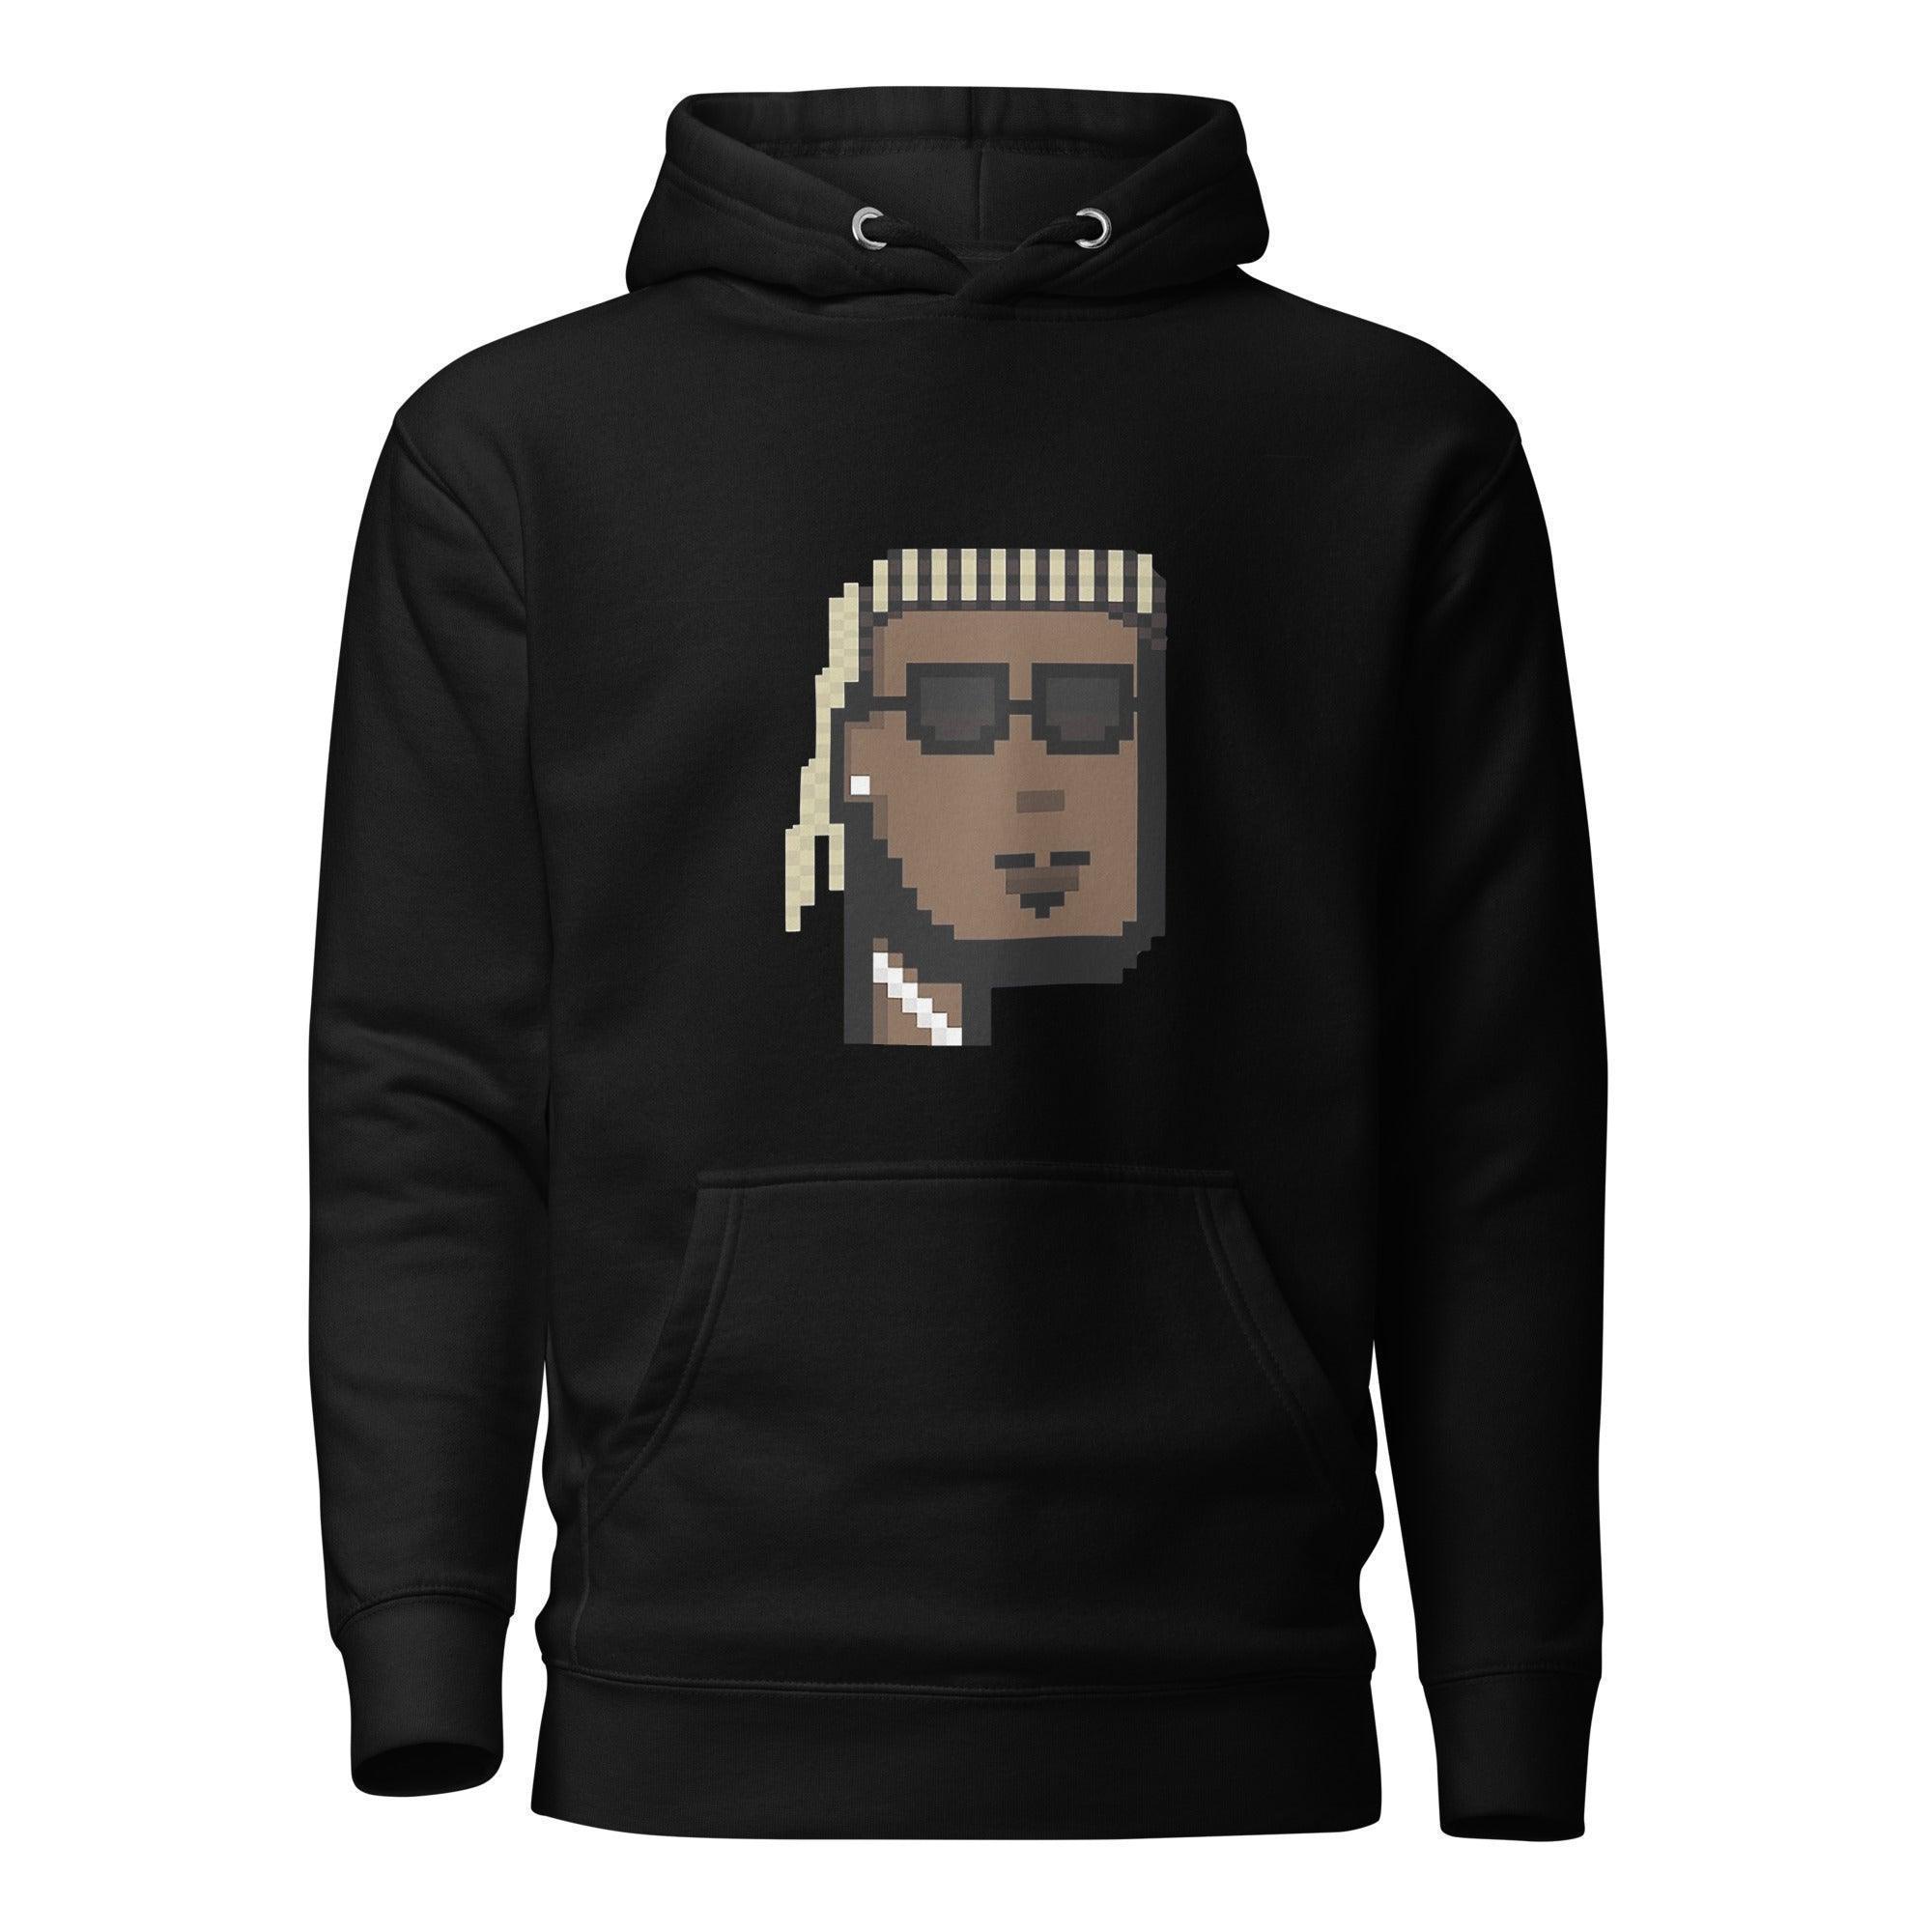 Celebrity Punk 7 Pullover Hoodie - InvestmenTees